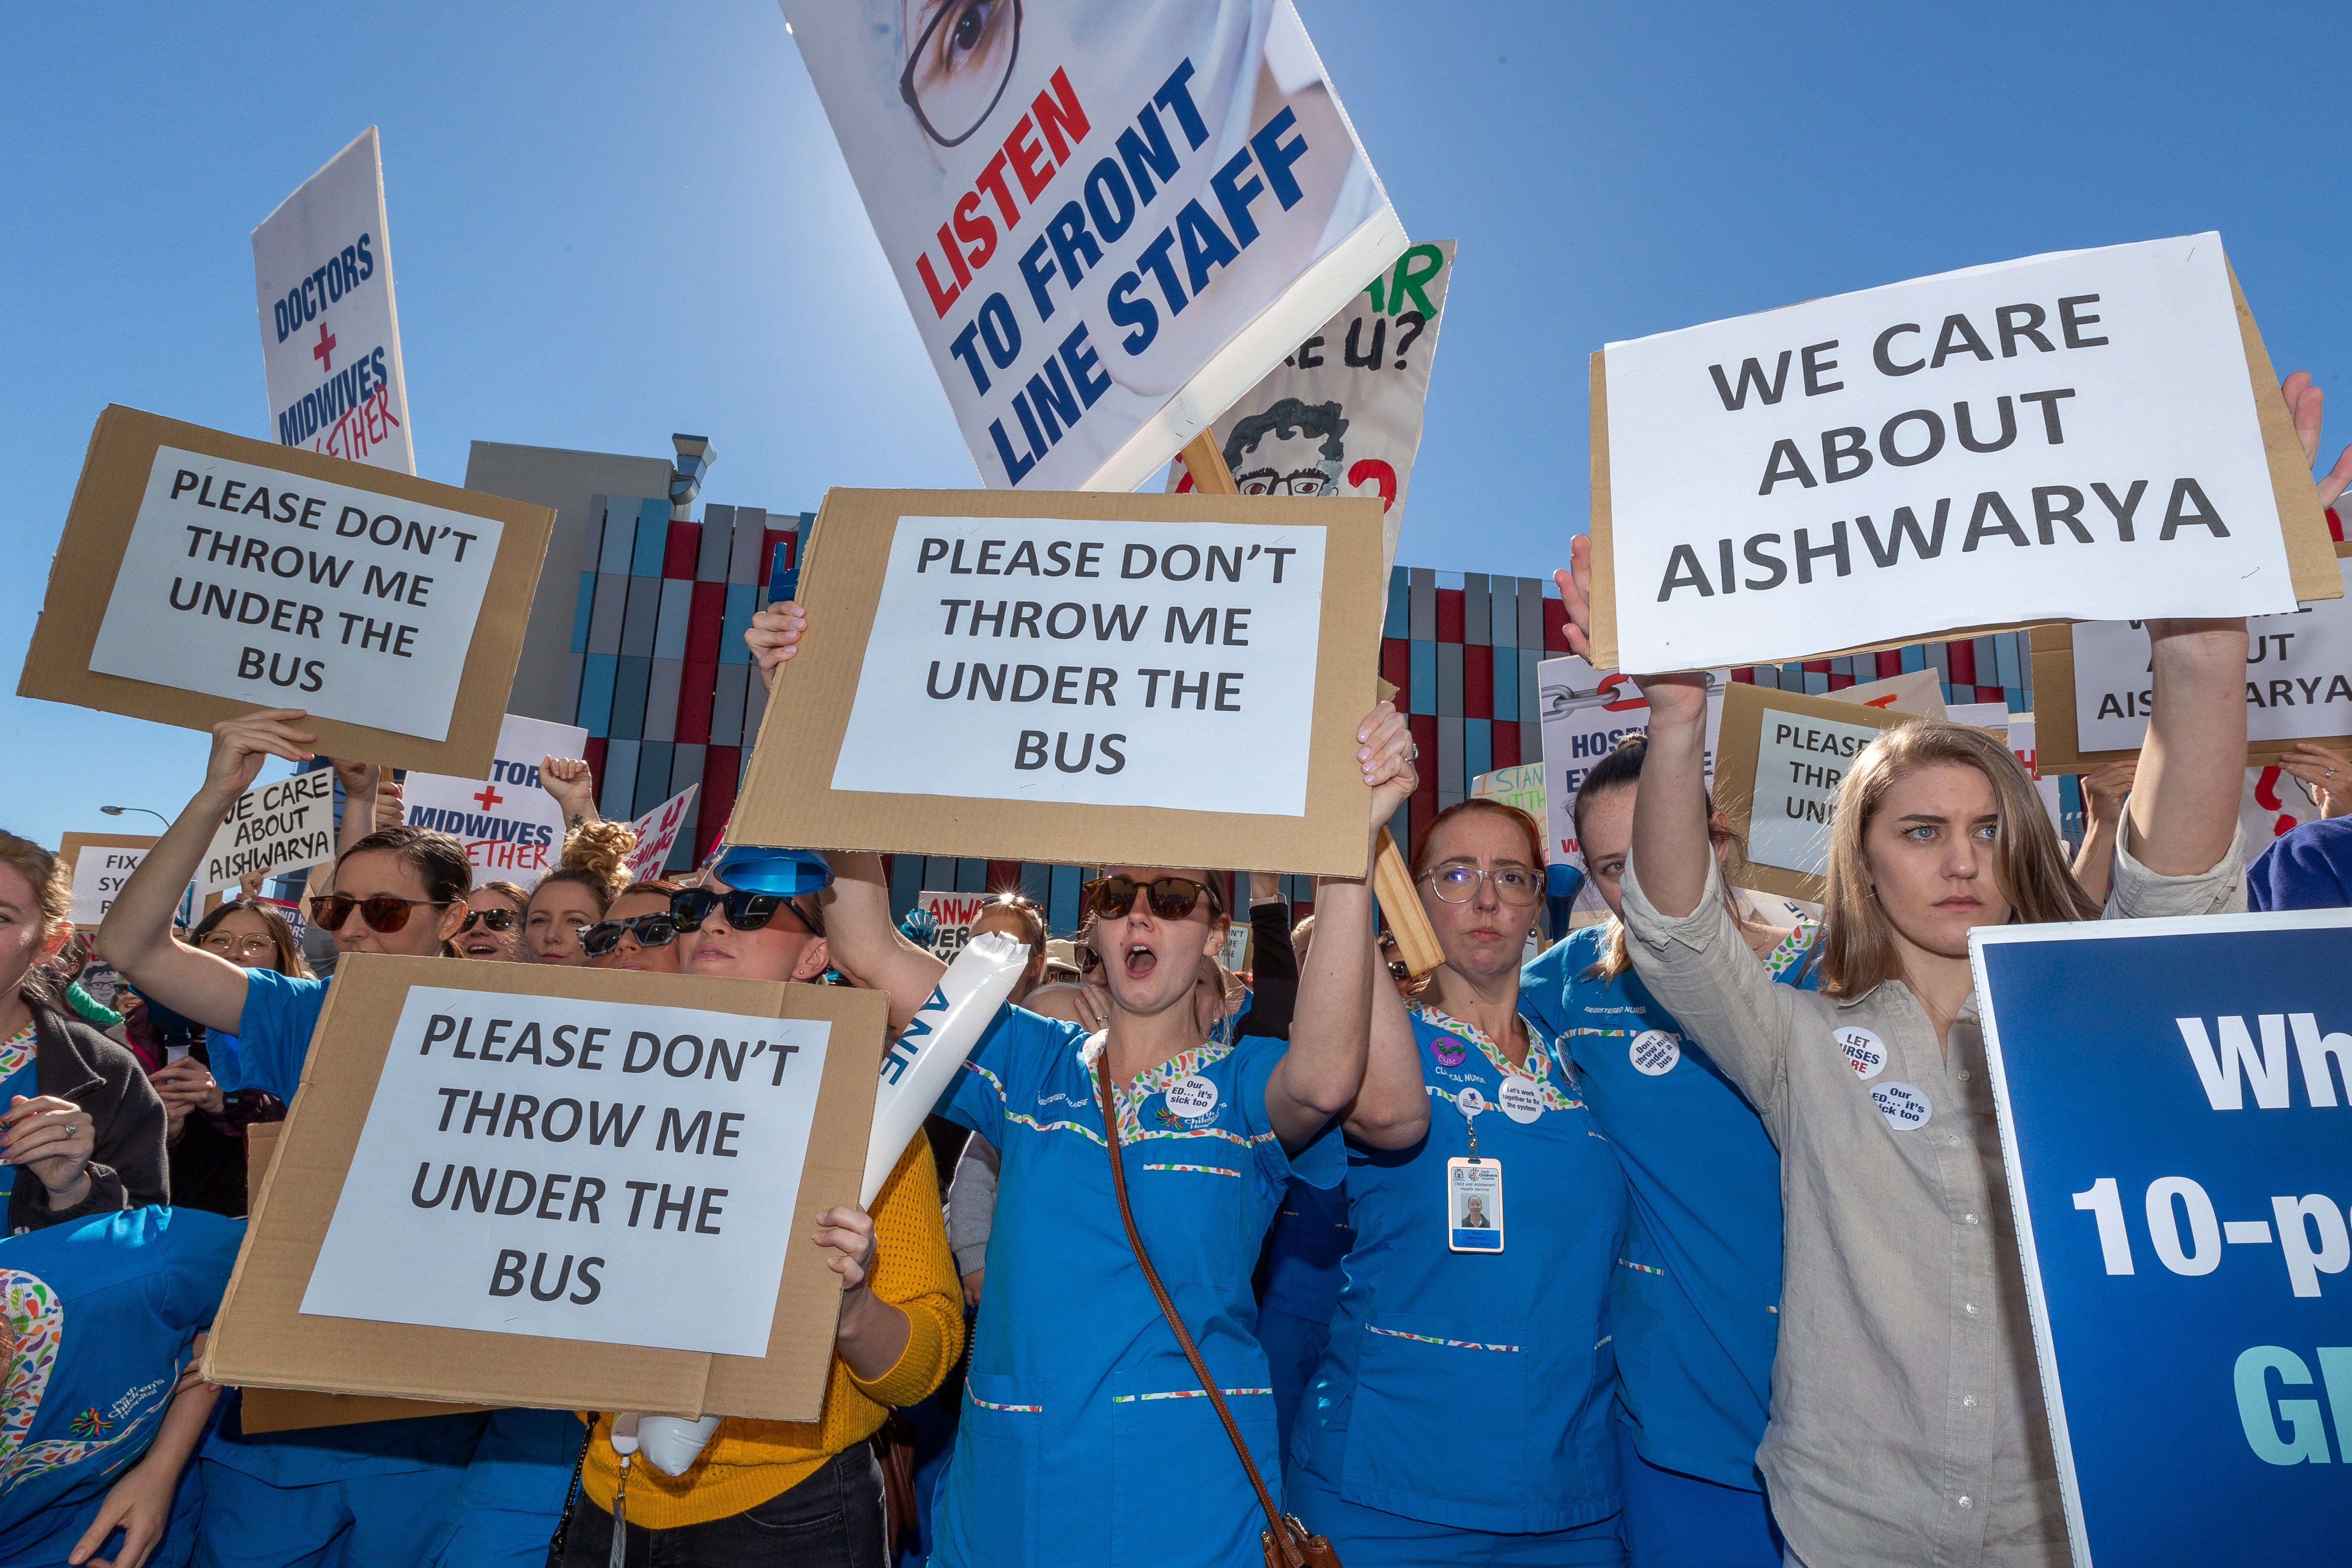 Medical staff rally outside Perth Children's Hospital to protest against the state government's handling of the death of Aishwarya Aswath.